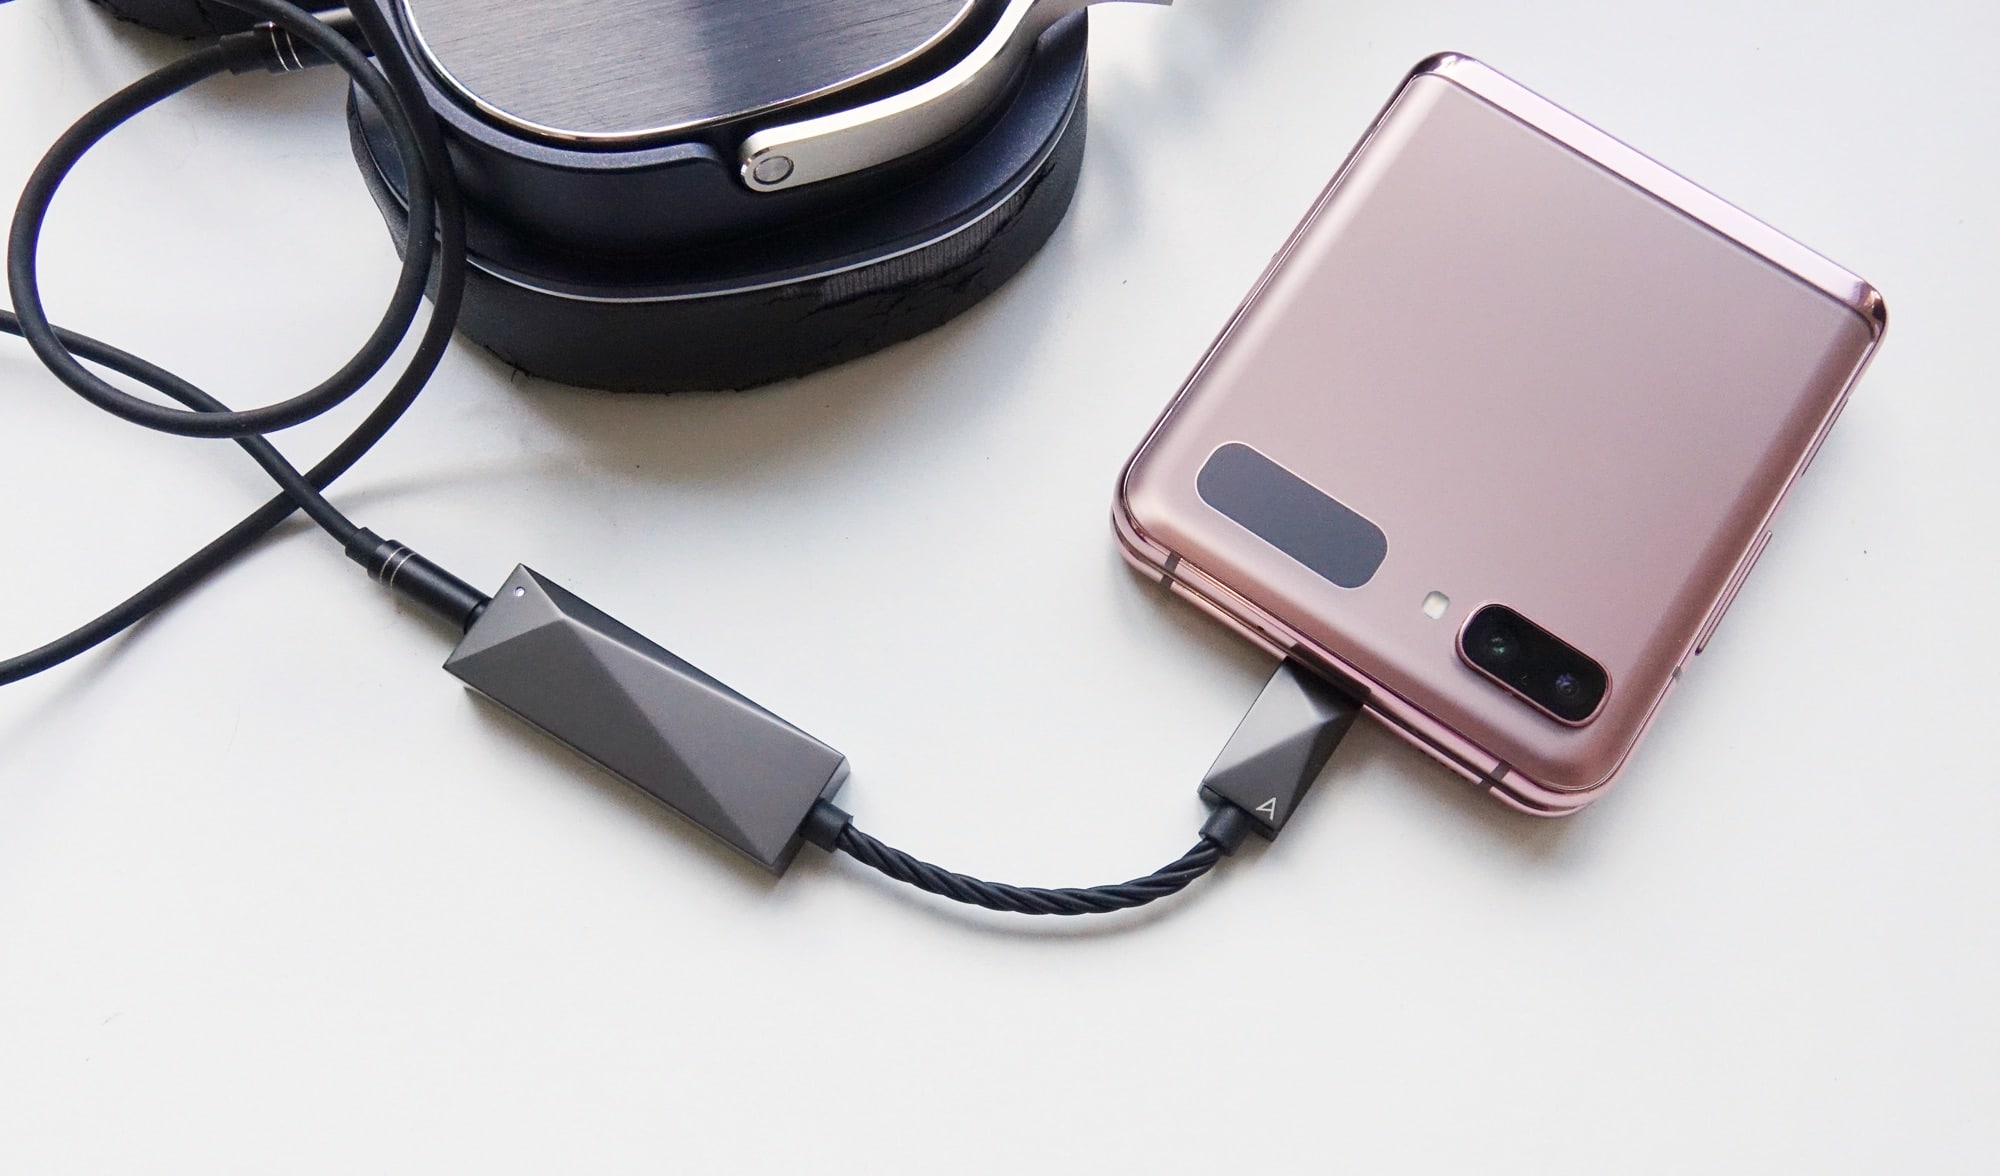 The Astell & Kern DAC Type C Cable plugged into the Galaxy Z Flip and Oppo PM-3